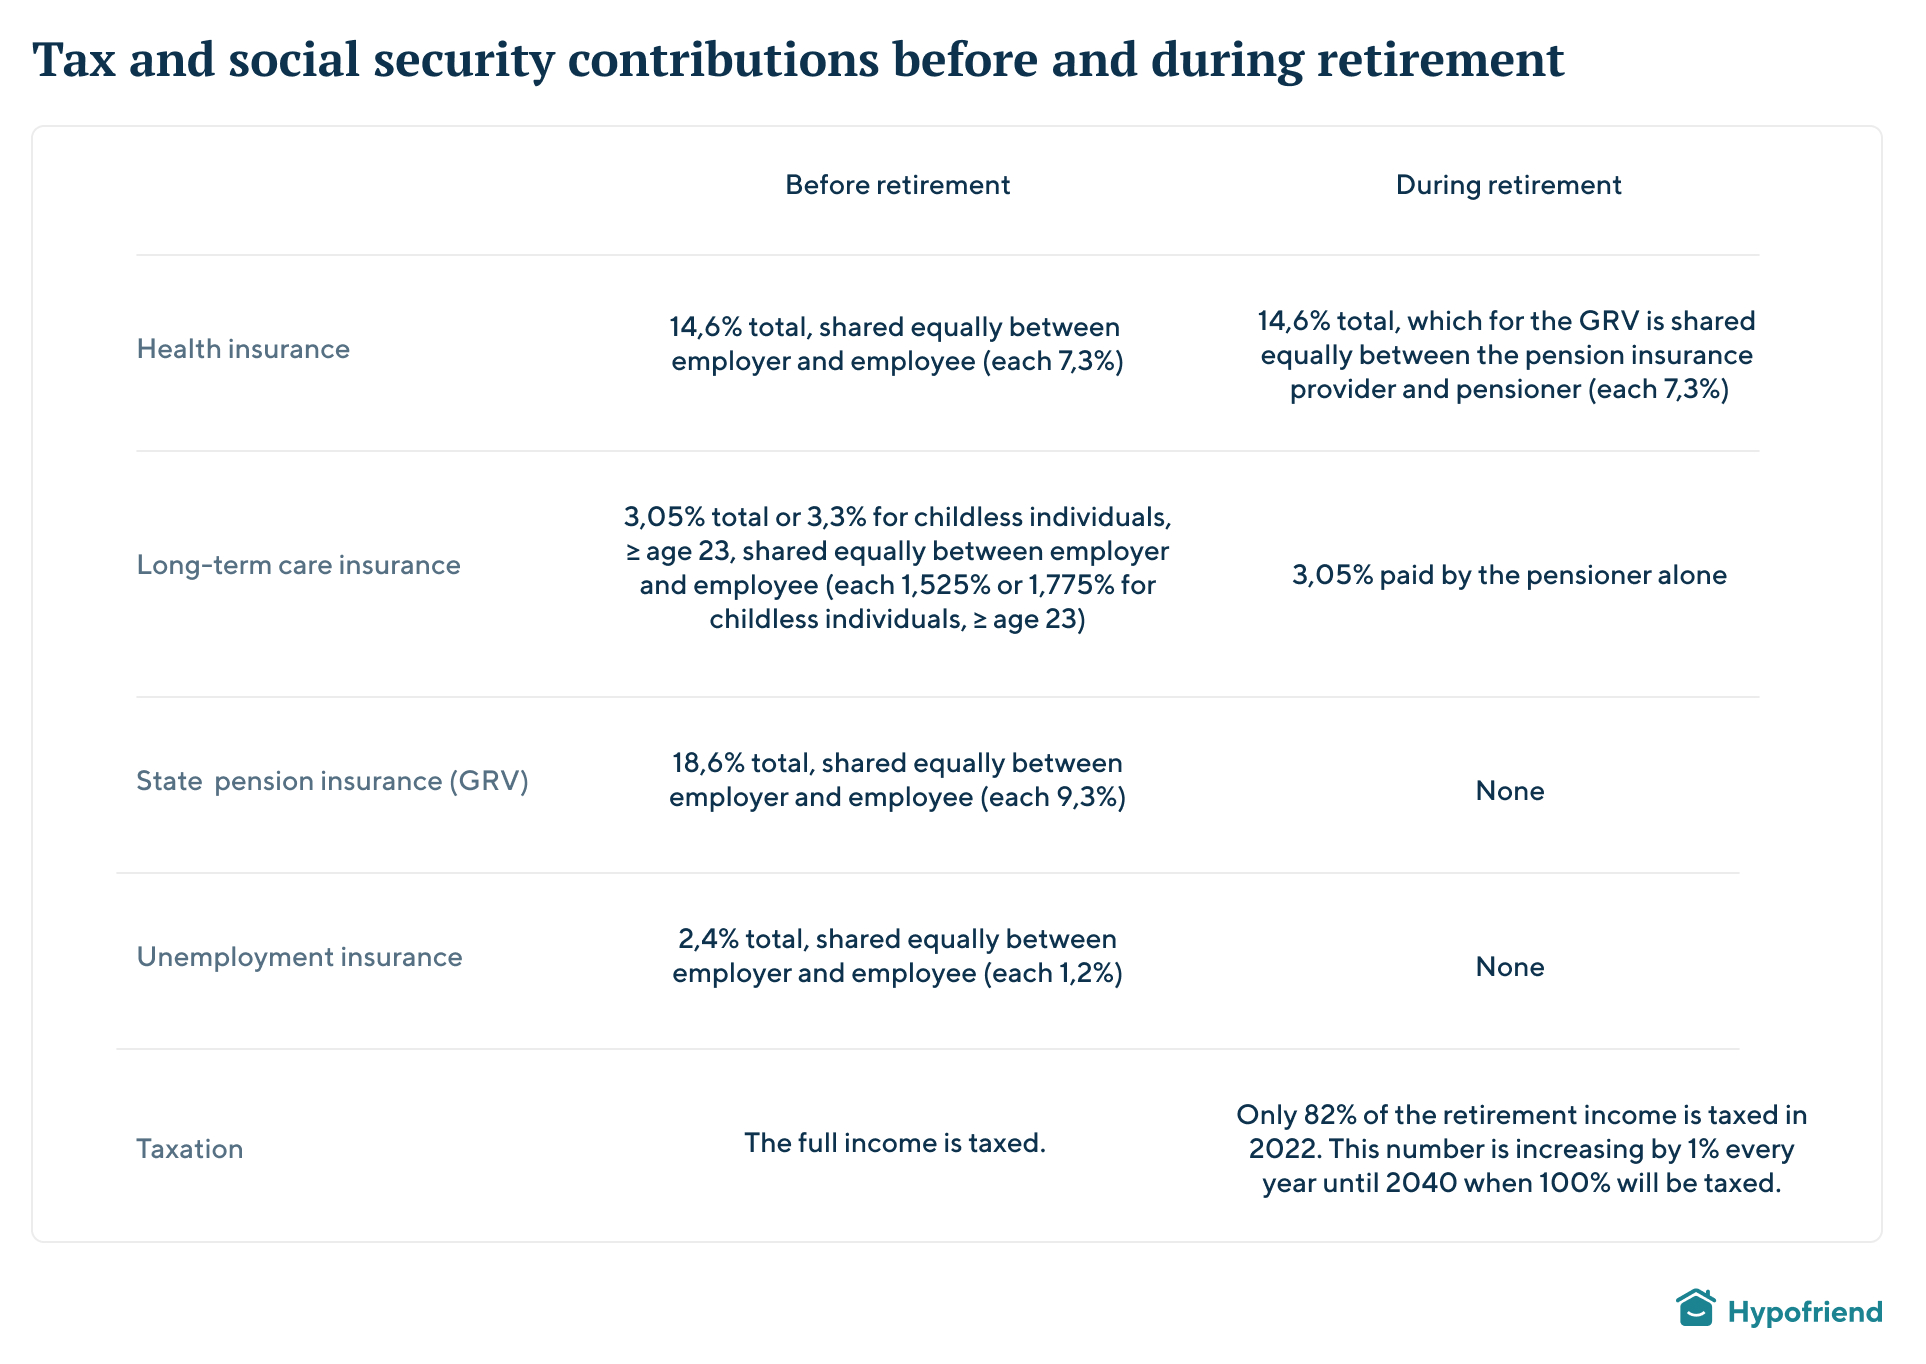 taxes-social-contribution-before-during-retirement